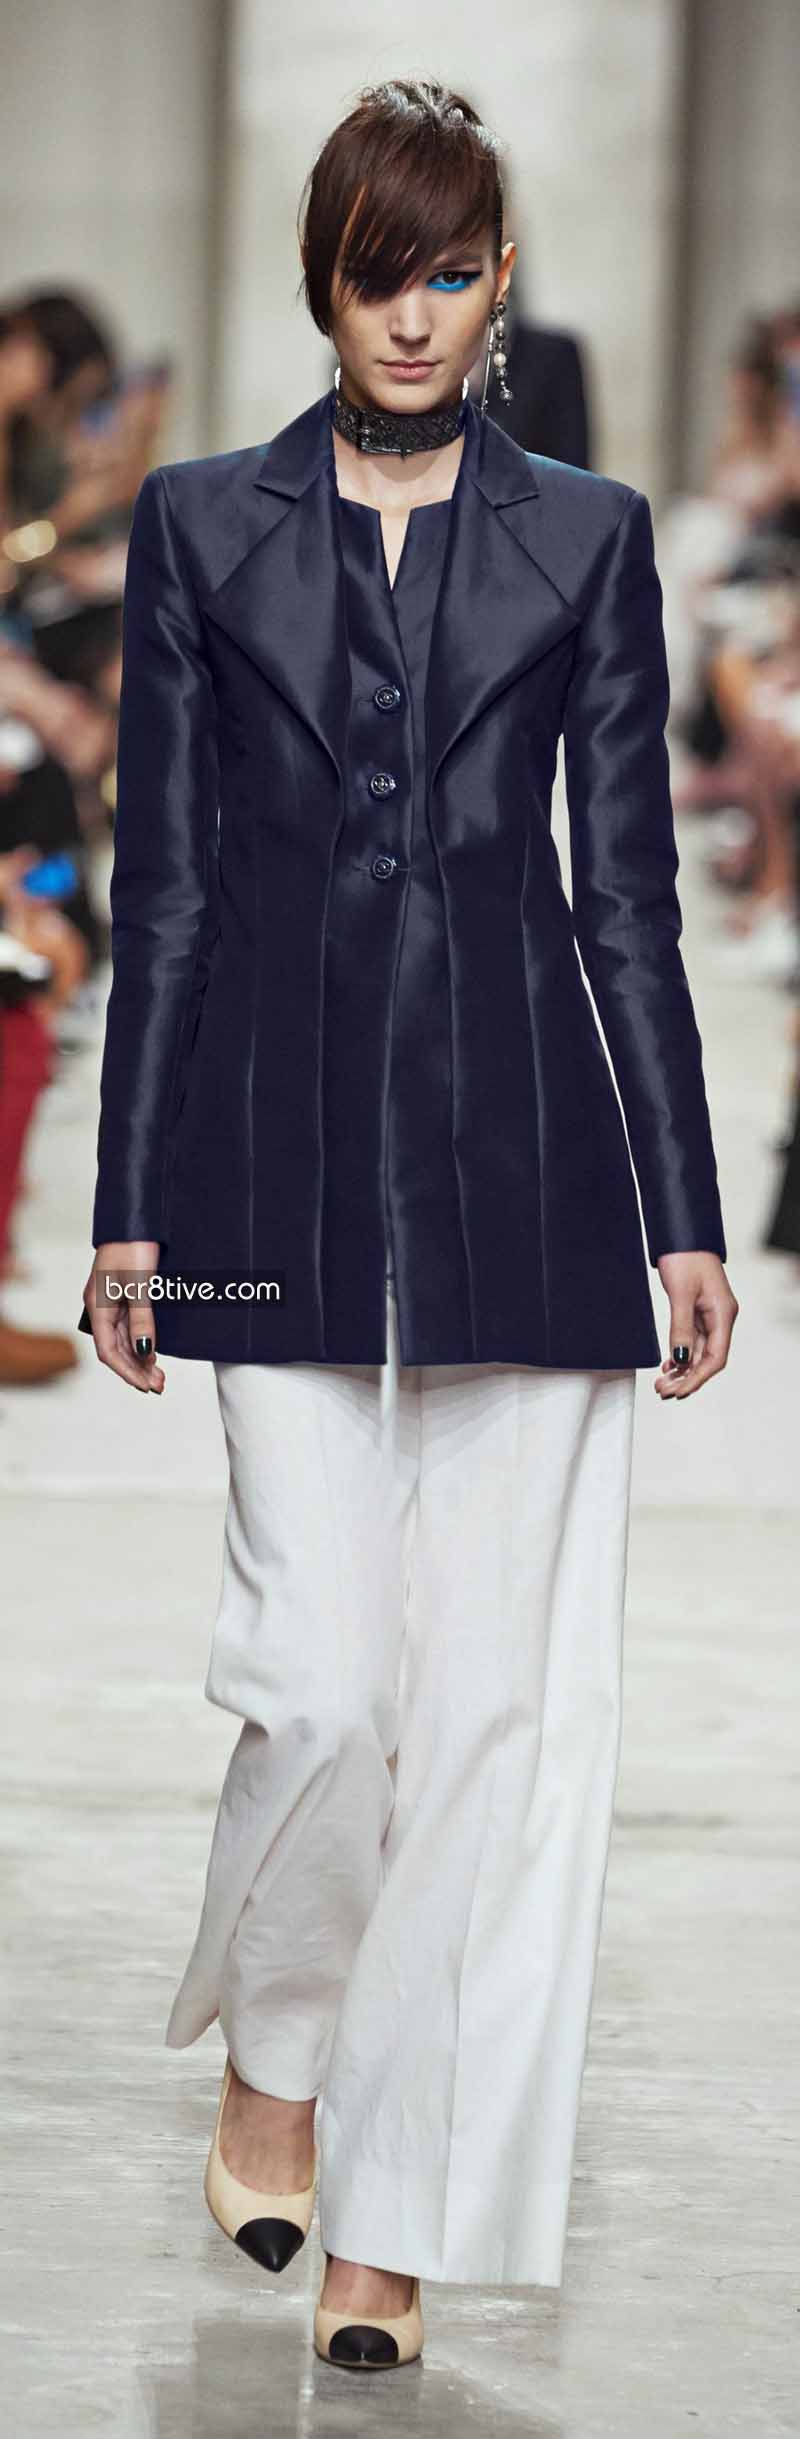 Chanel Resort 2013-14 Collection – Be Creative